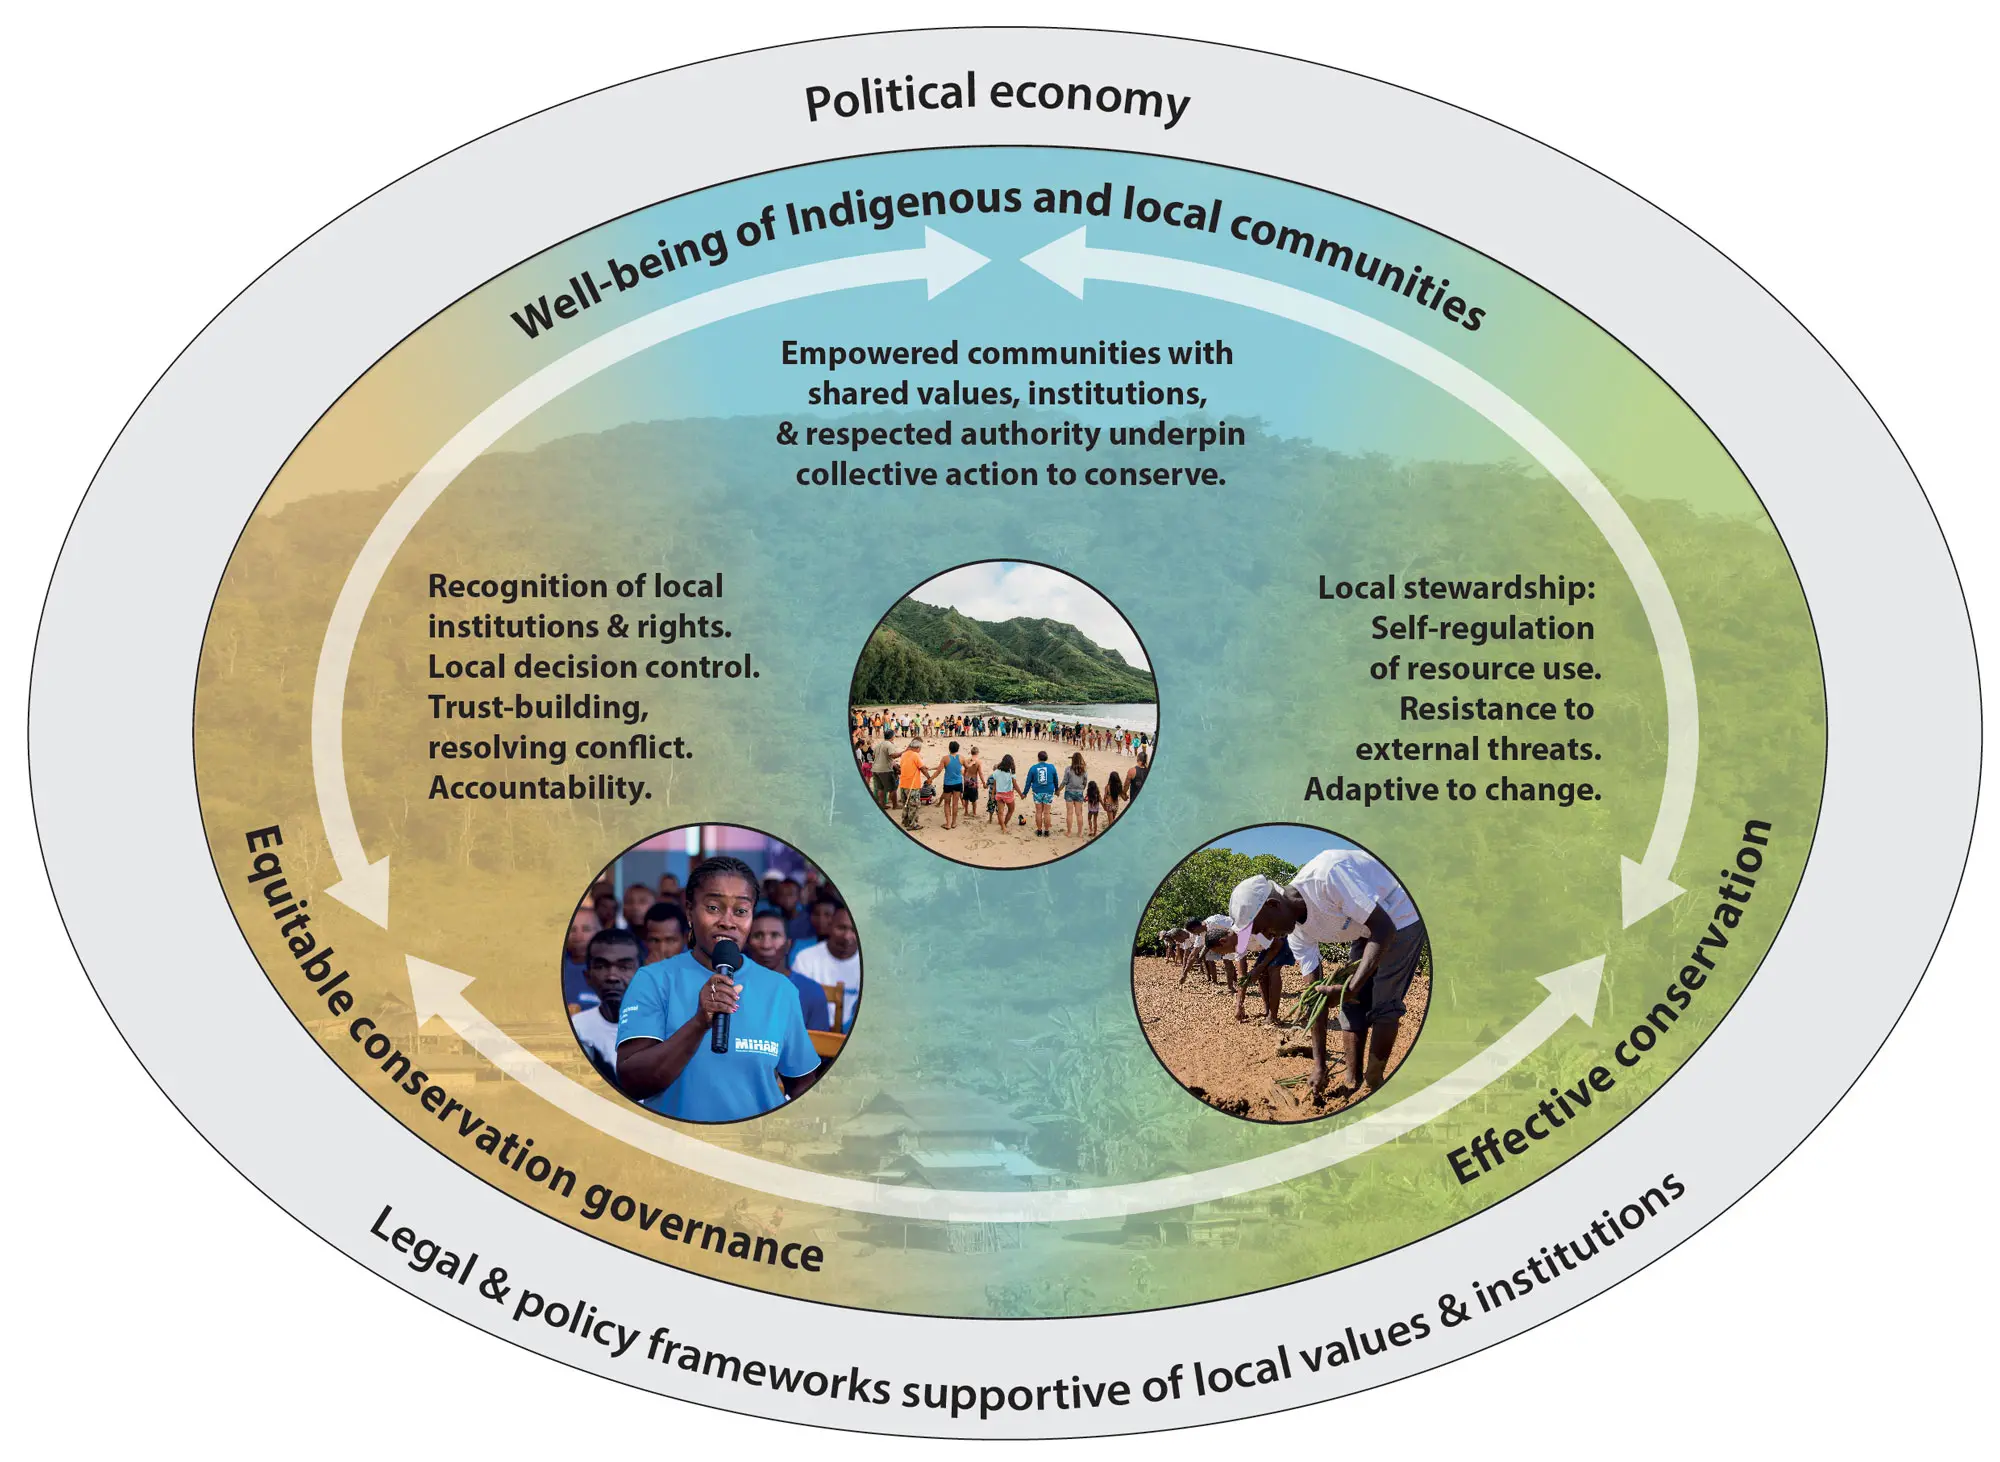 The role of Indigenous peoples and local communities in effective and equitable conservation